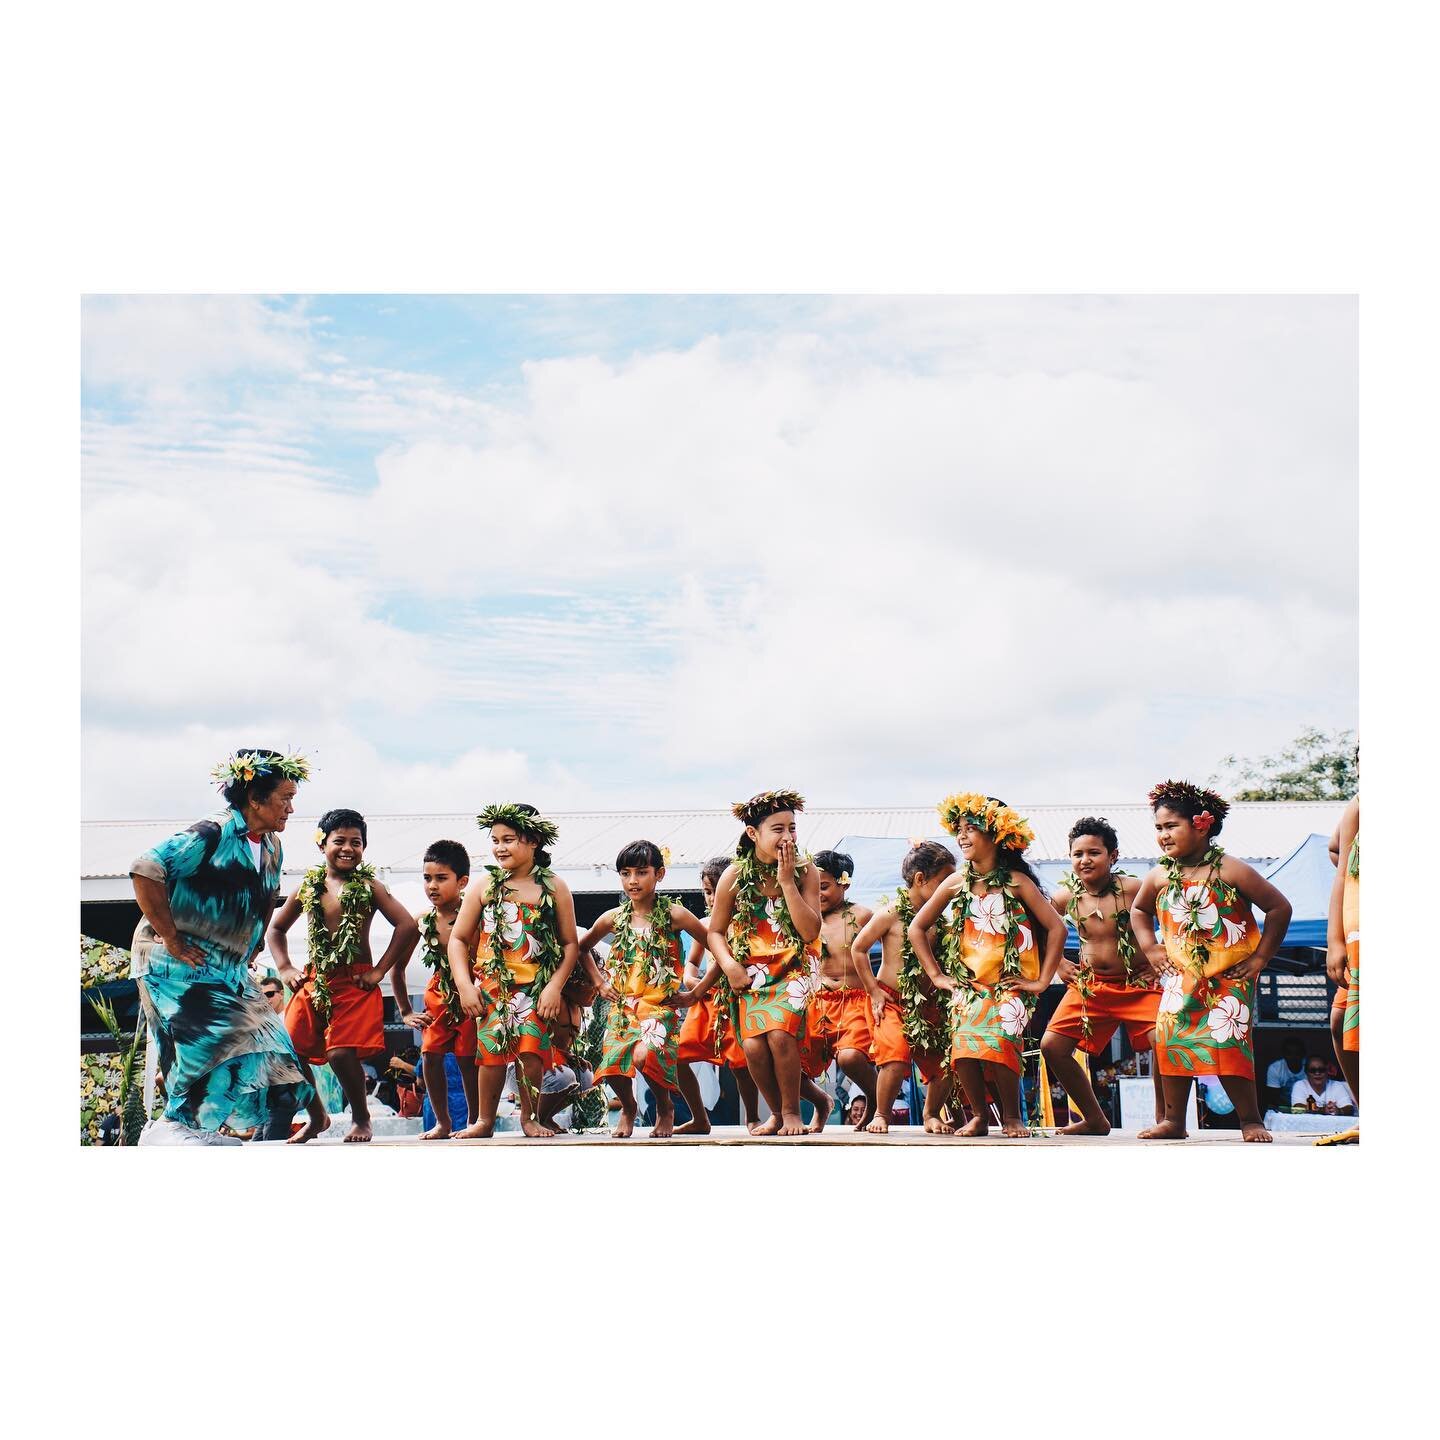 I have been dreaming of this trip to Niue as we bunker down in Nz during the winter months. We have so much to learn for our neighbors in the Pacific and the way they approach life in the islands. The joy is palpable ☀️ Children performing at Niue Sh